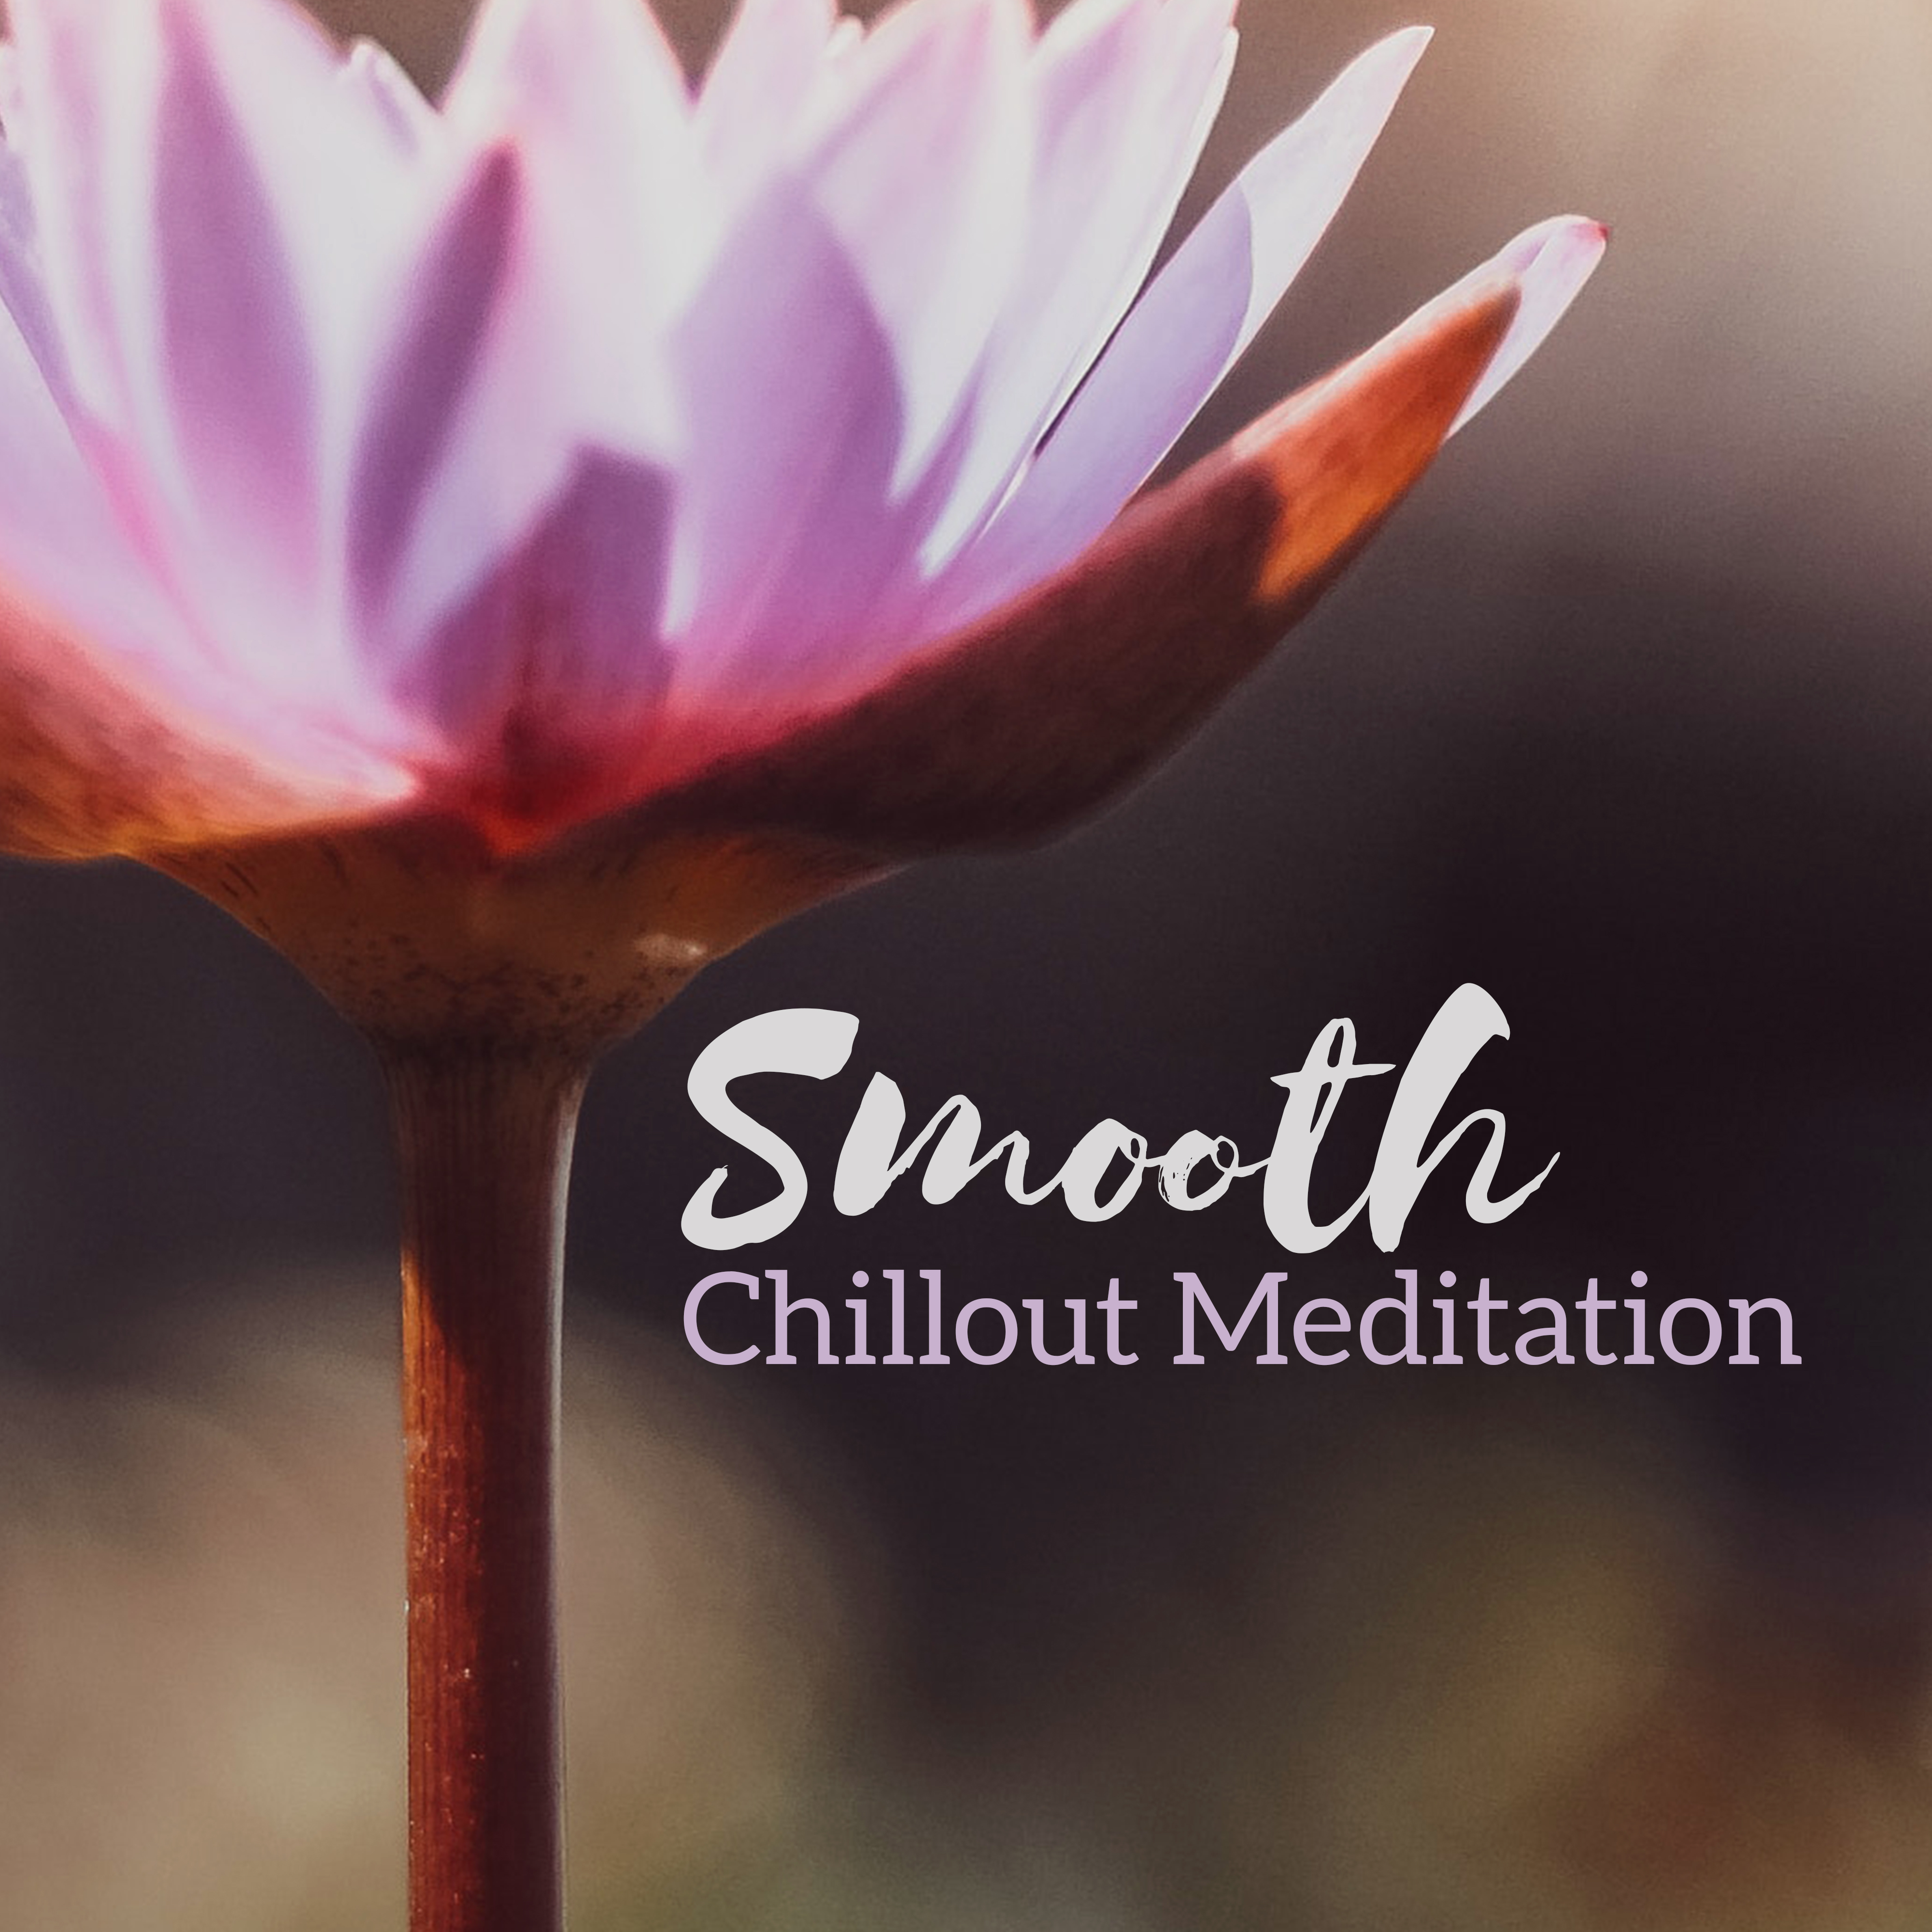 Smooth Chillout Meditation